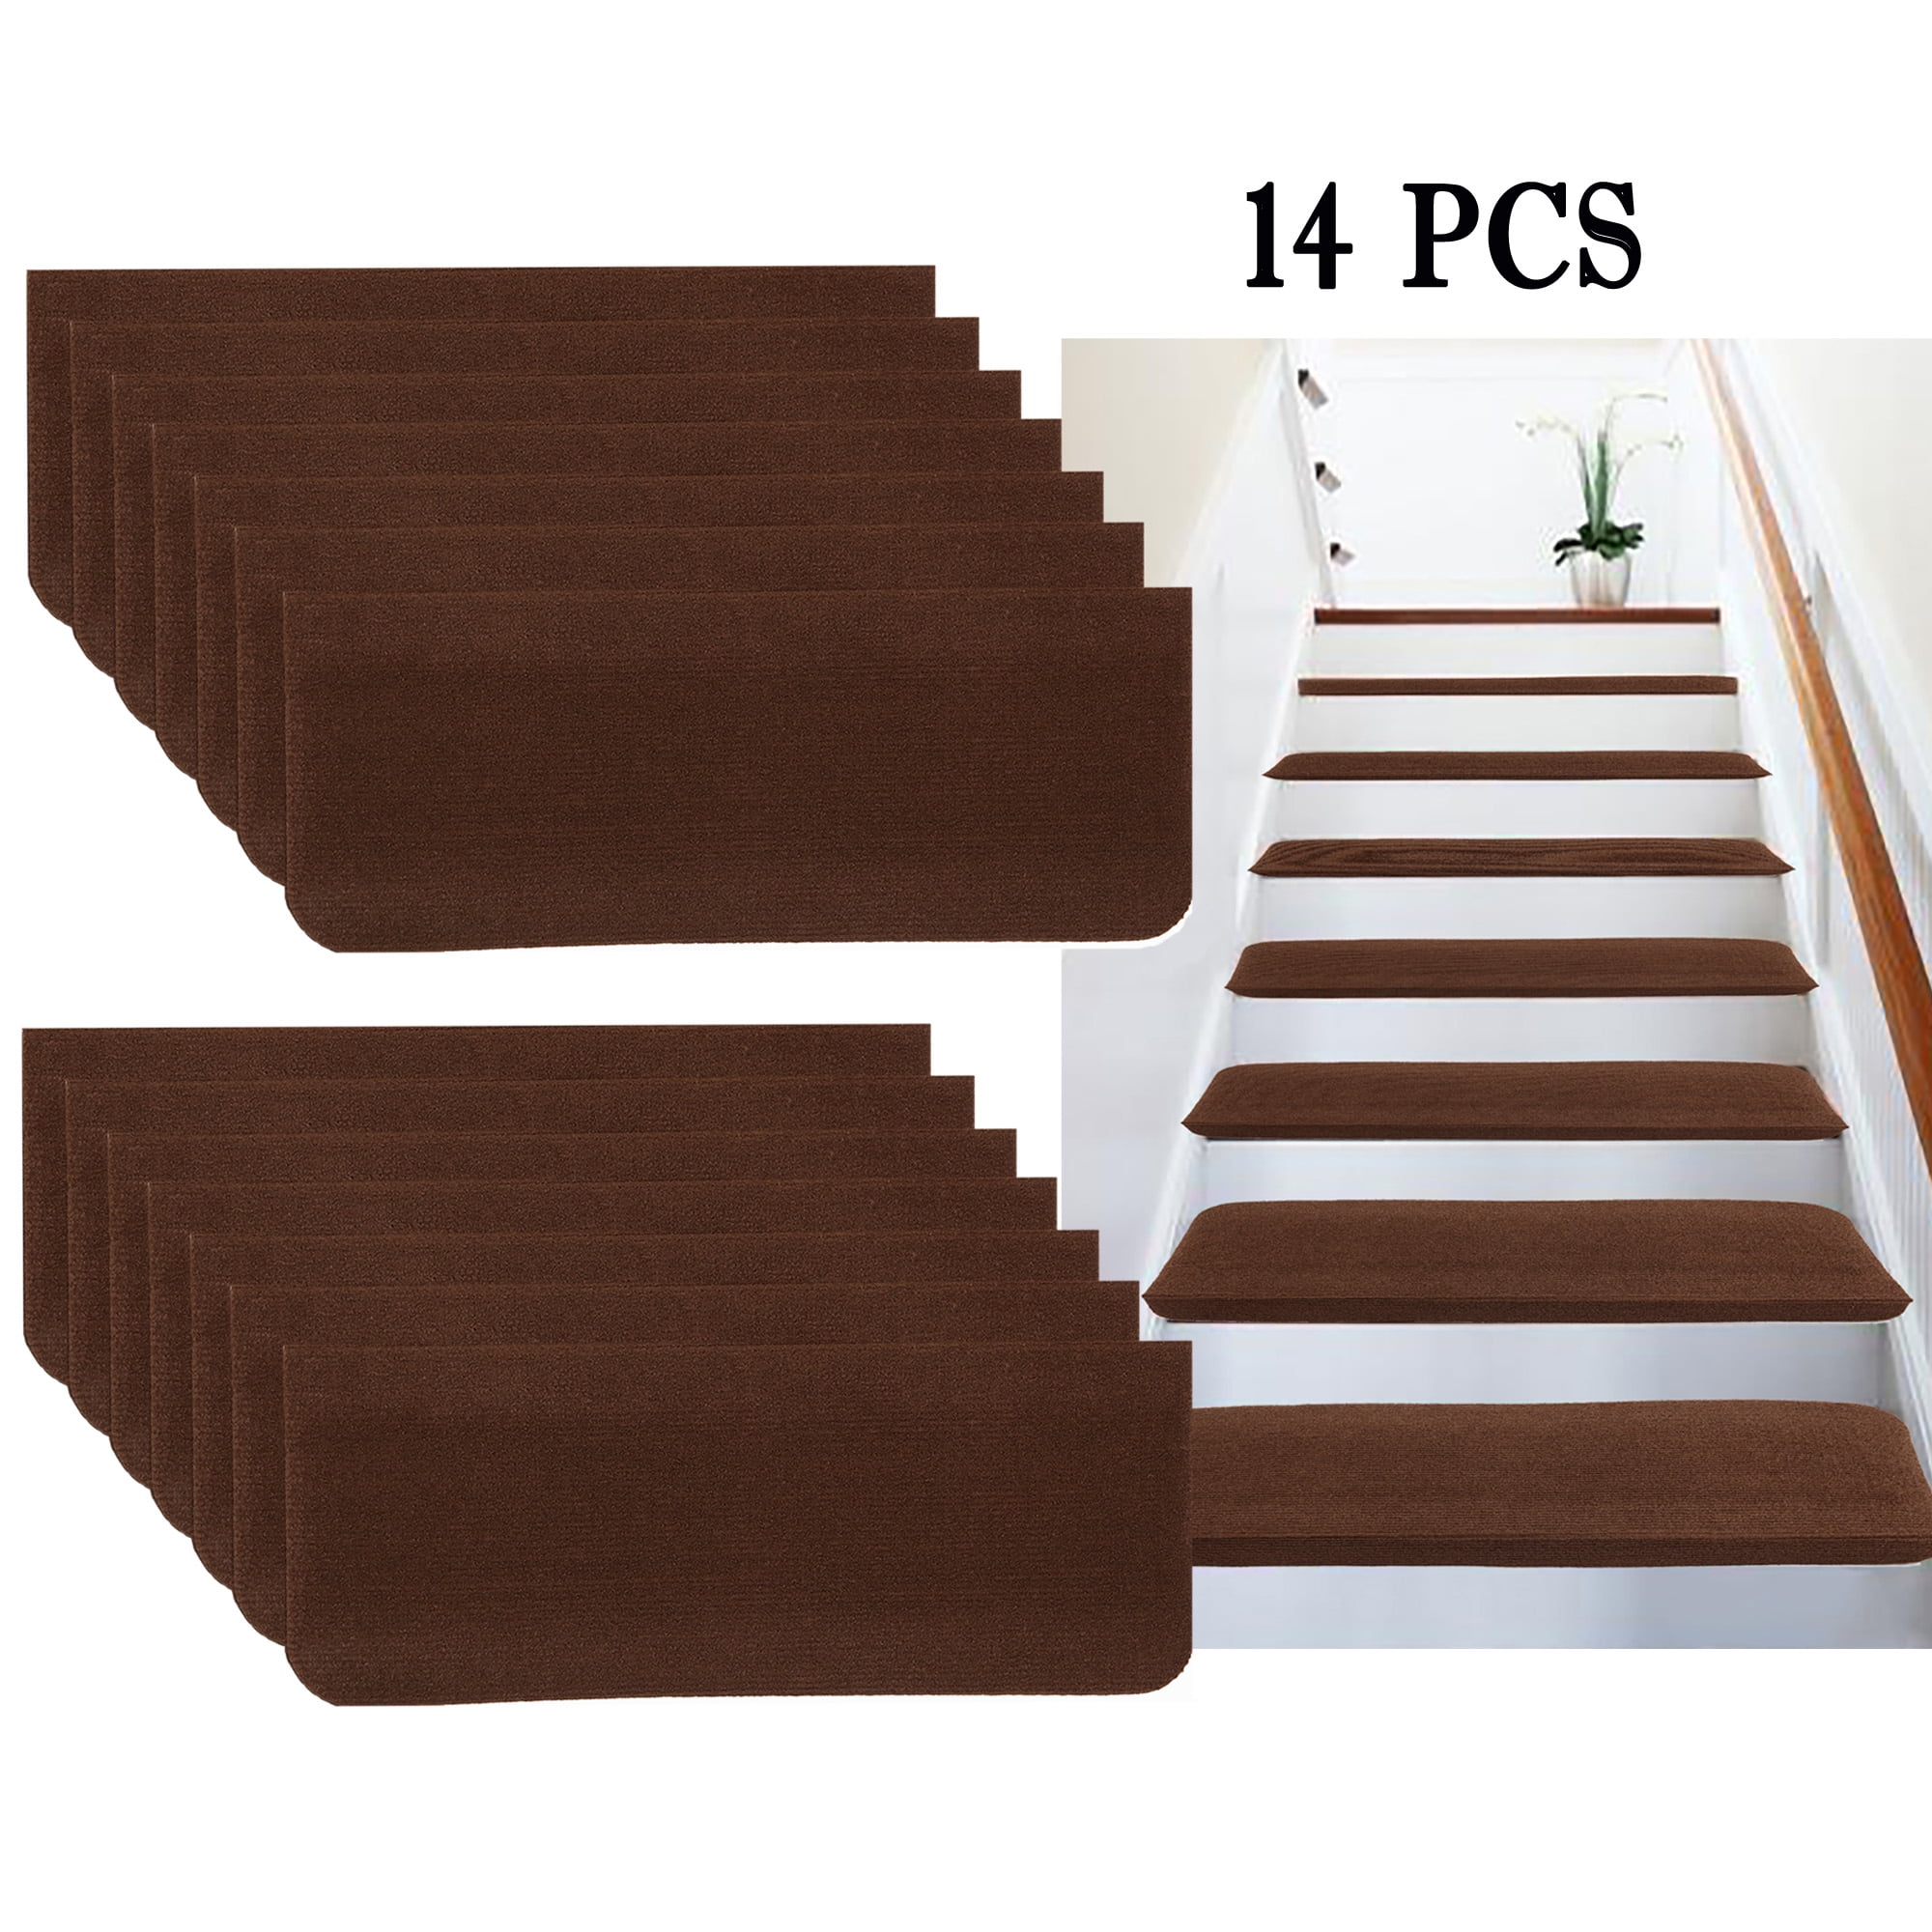 Adhesive Carpet Stair Treads Mat Staircase Non-slip Step Rug Cover Protection